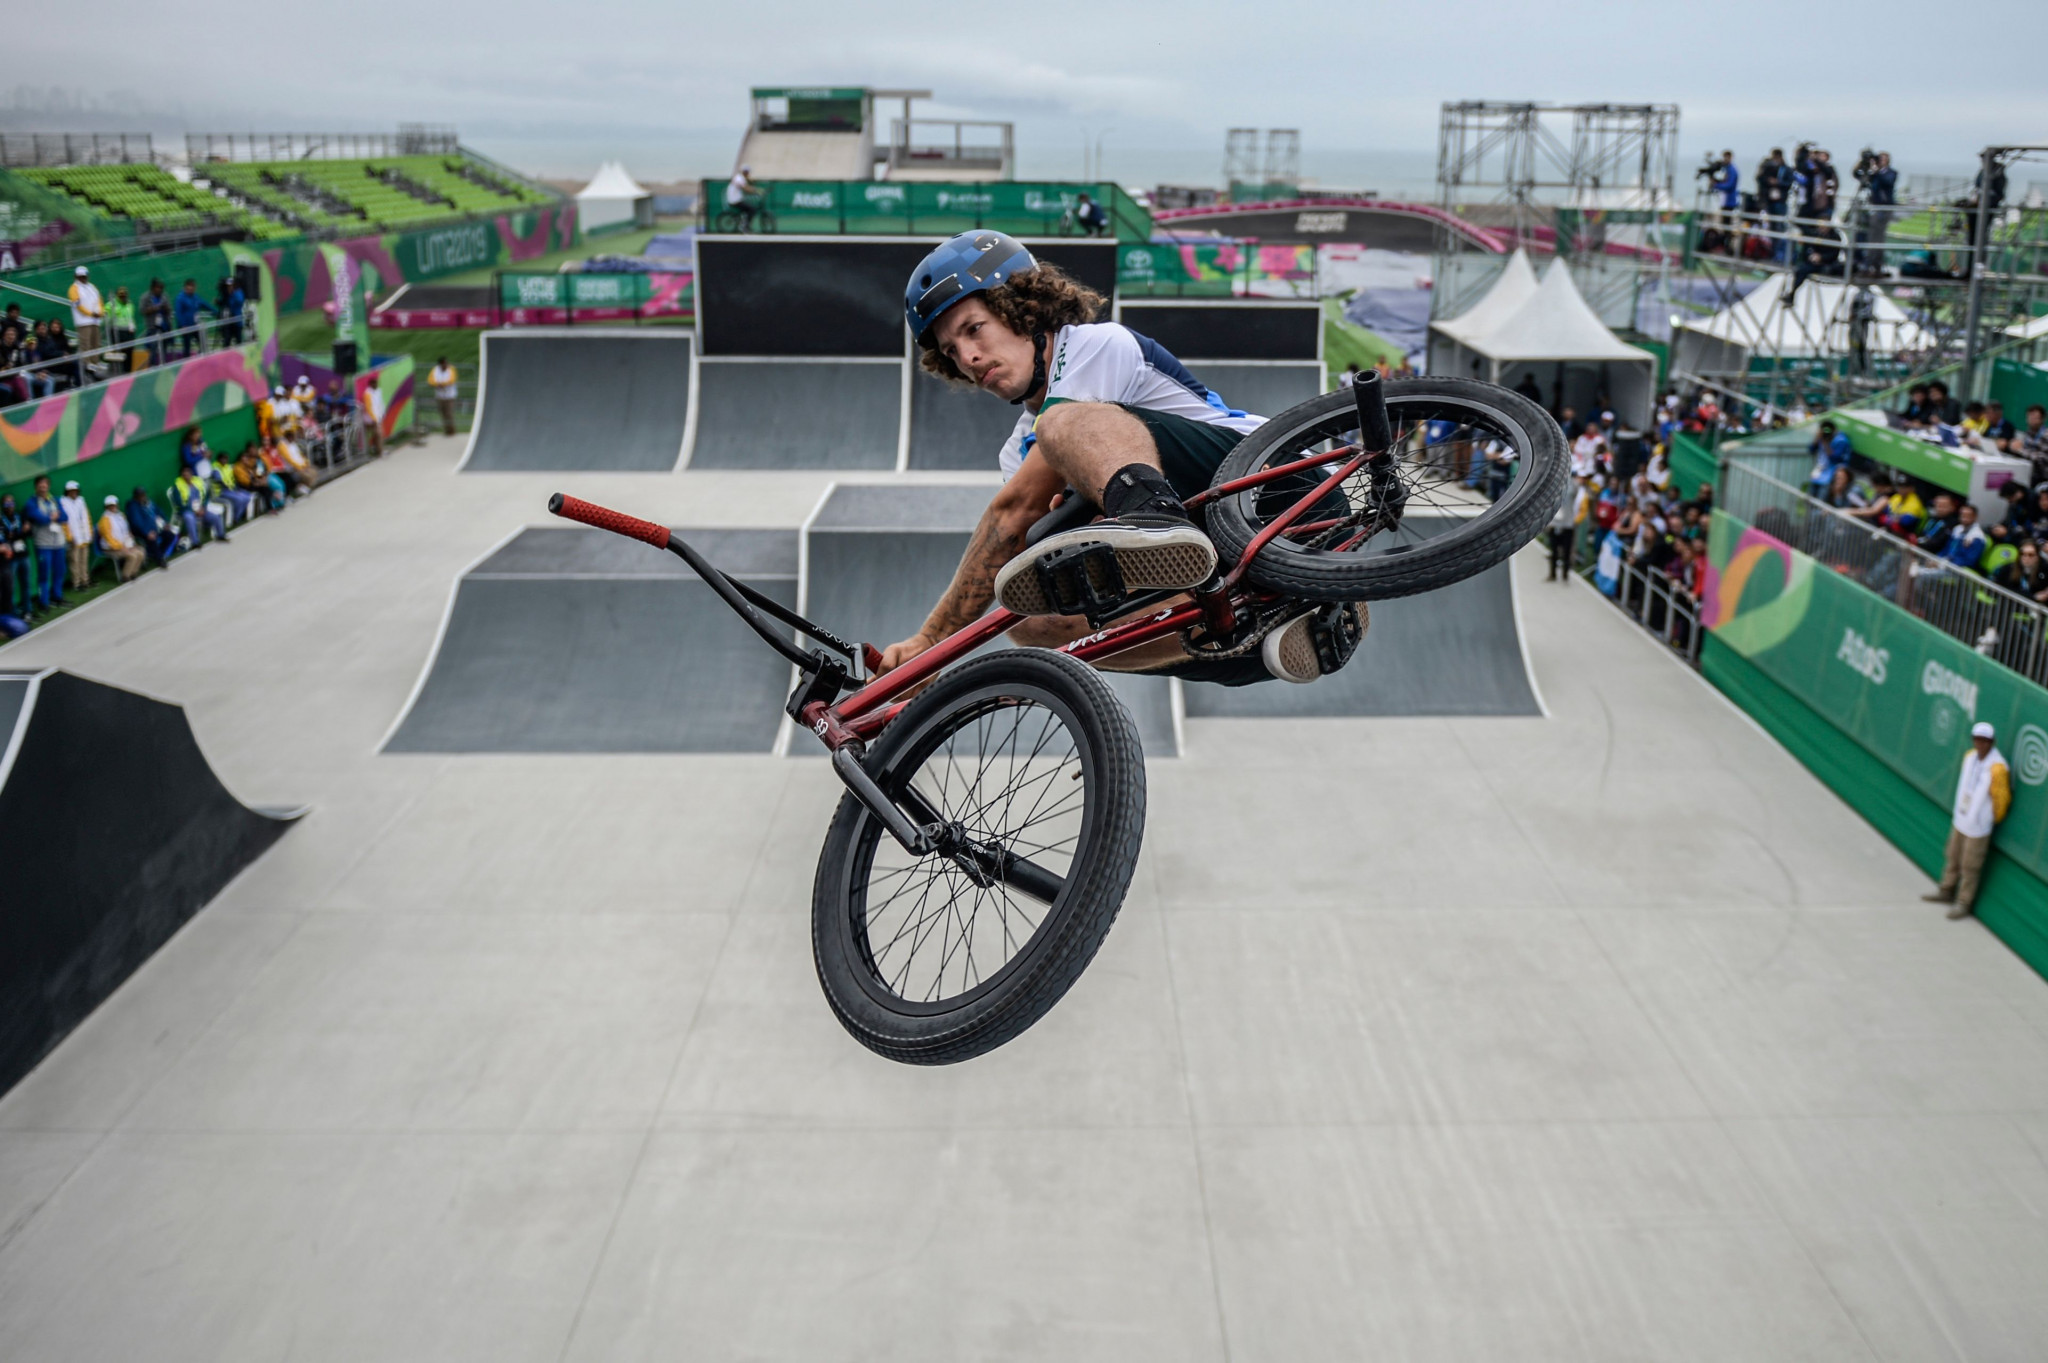 insidethegames is reporting LIVE from the 2019 Pan American Games in Lima